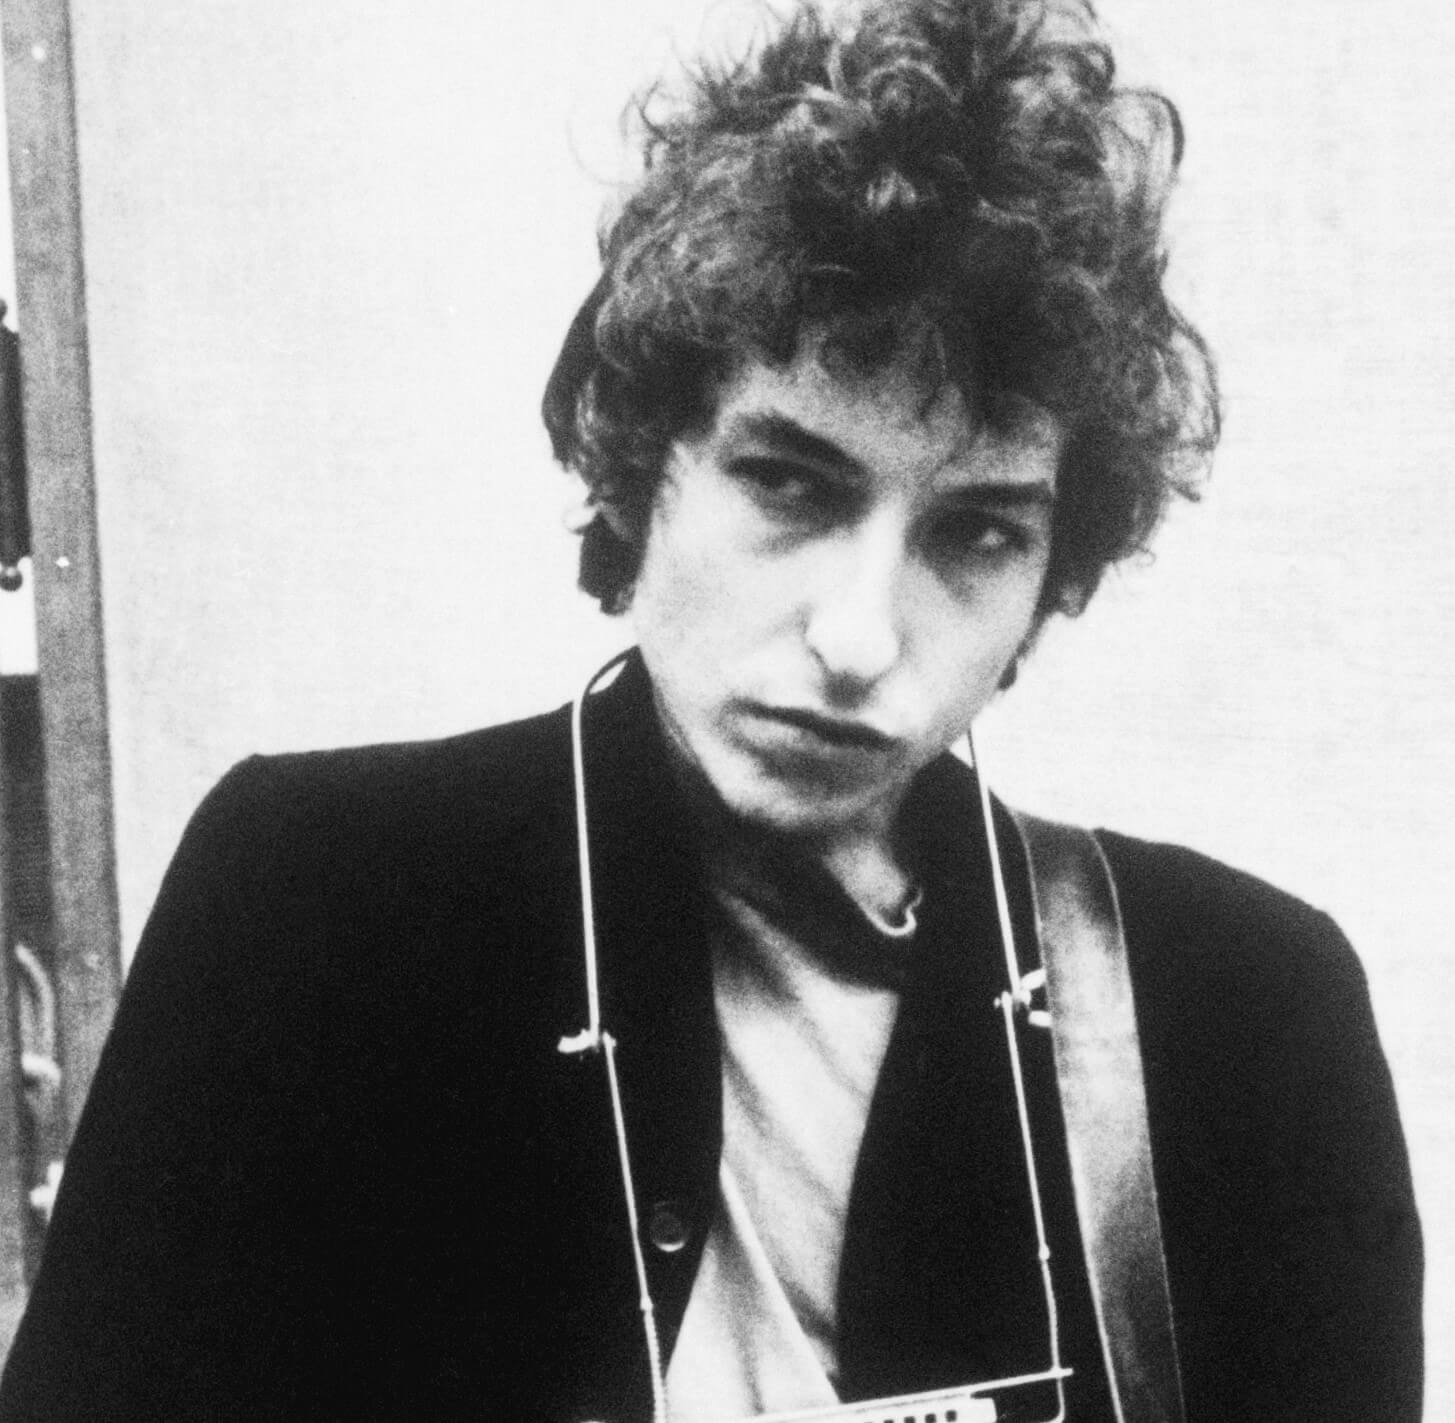 Bob Dylan in black-and-white